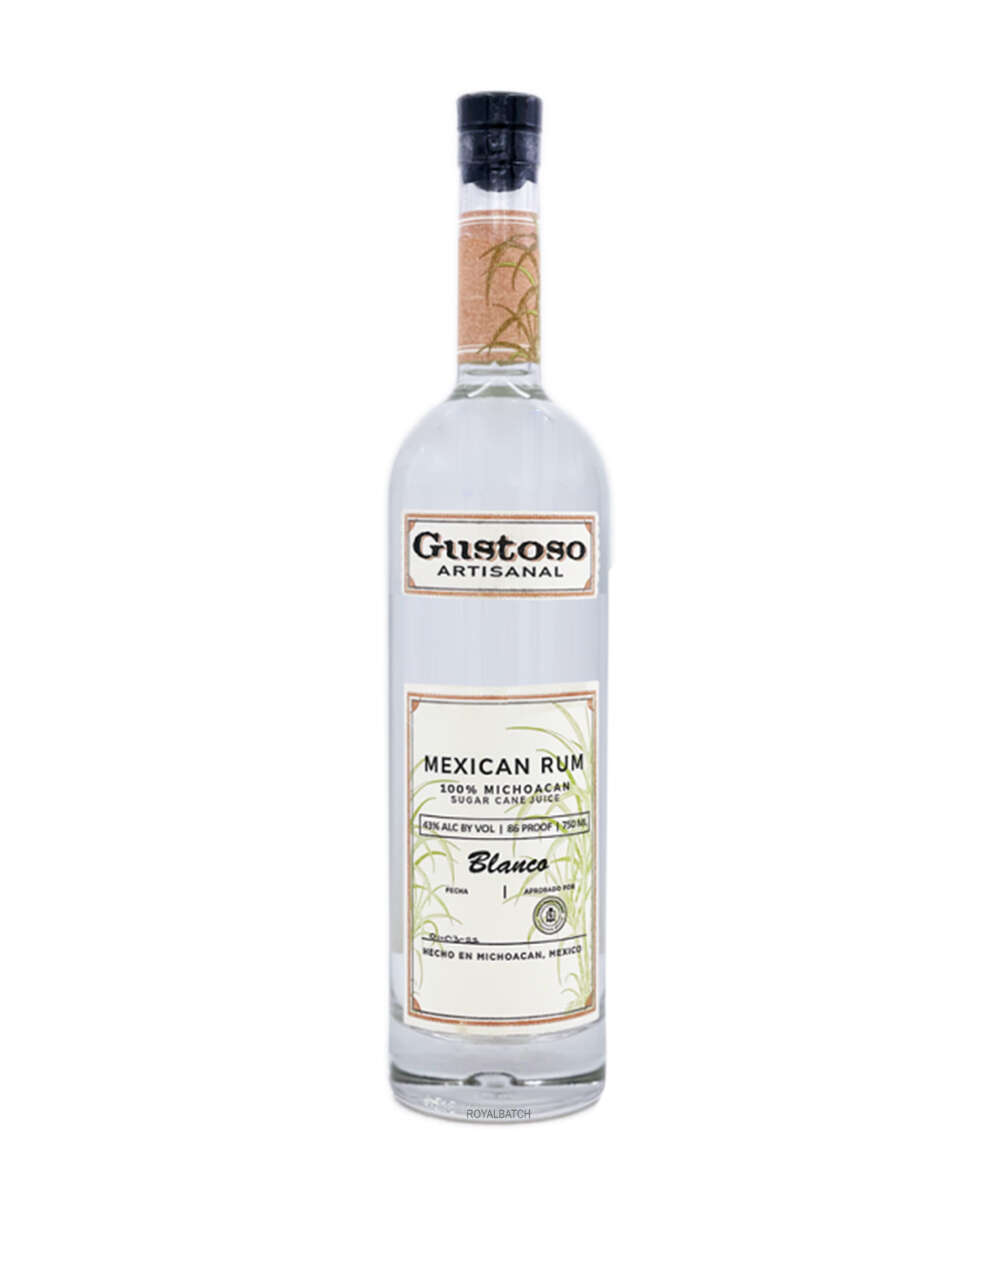 Gustoso Artisanal Mexican Blanco Rum 1L